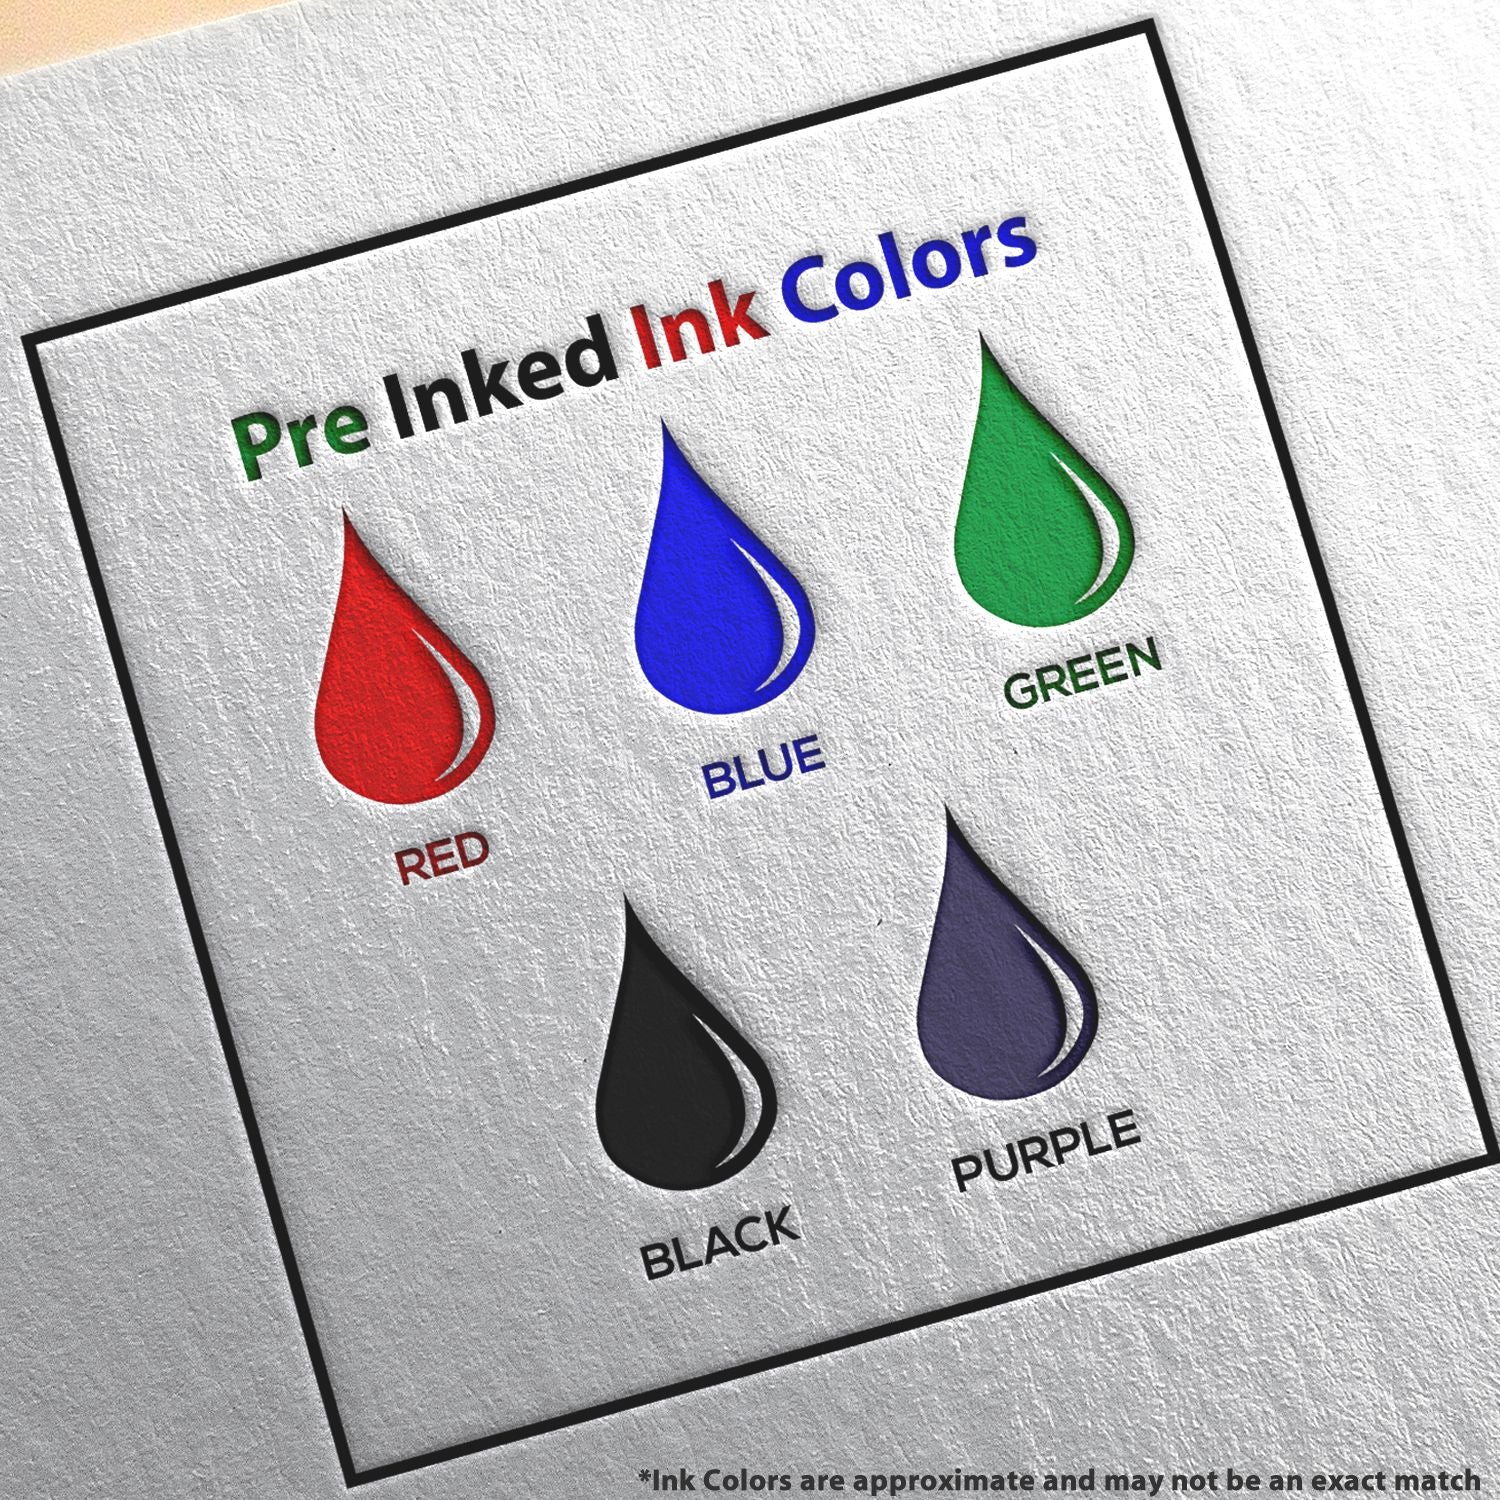 A picture showing the different ink colors or hues available for the Premium MaxLight Pre-Inked Alabama Landscape Architectural Stamp product.